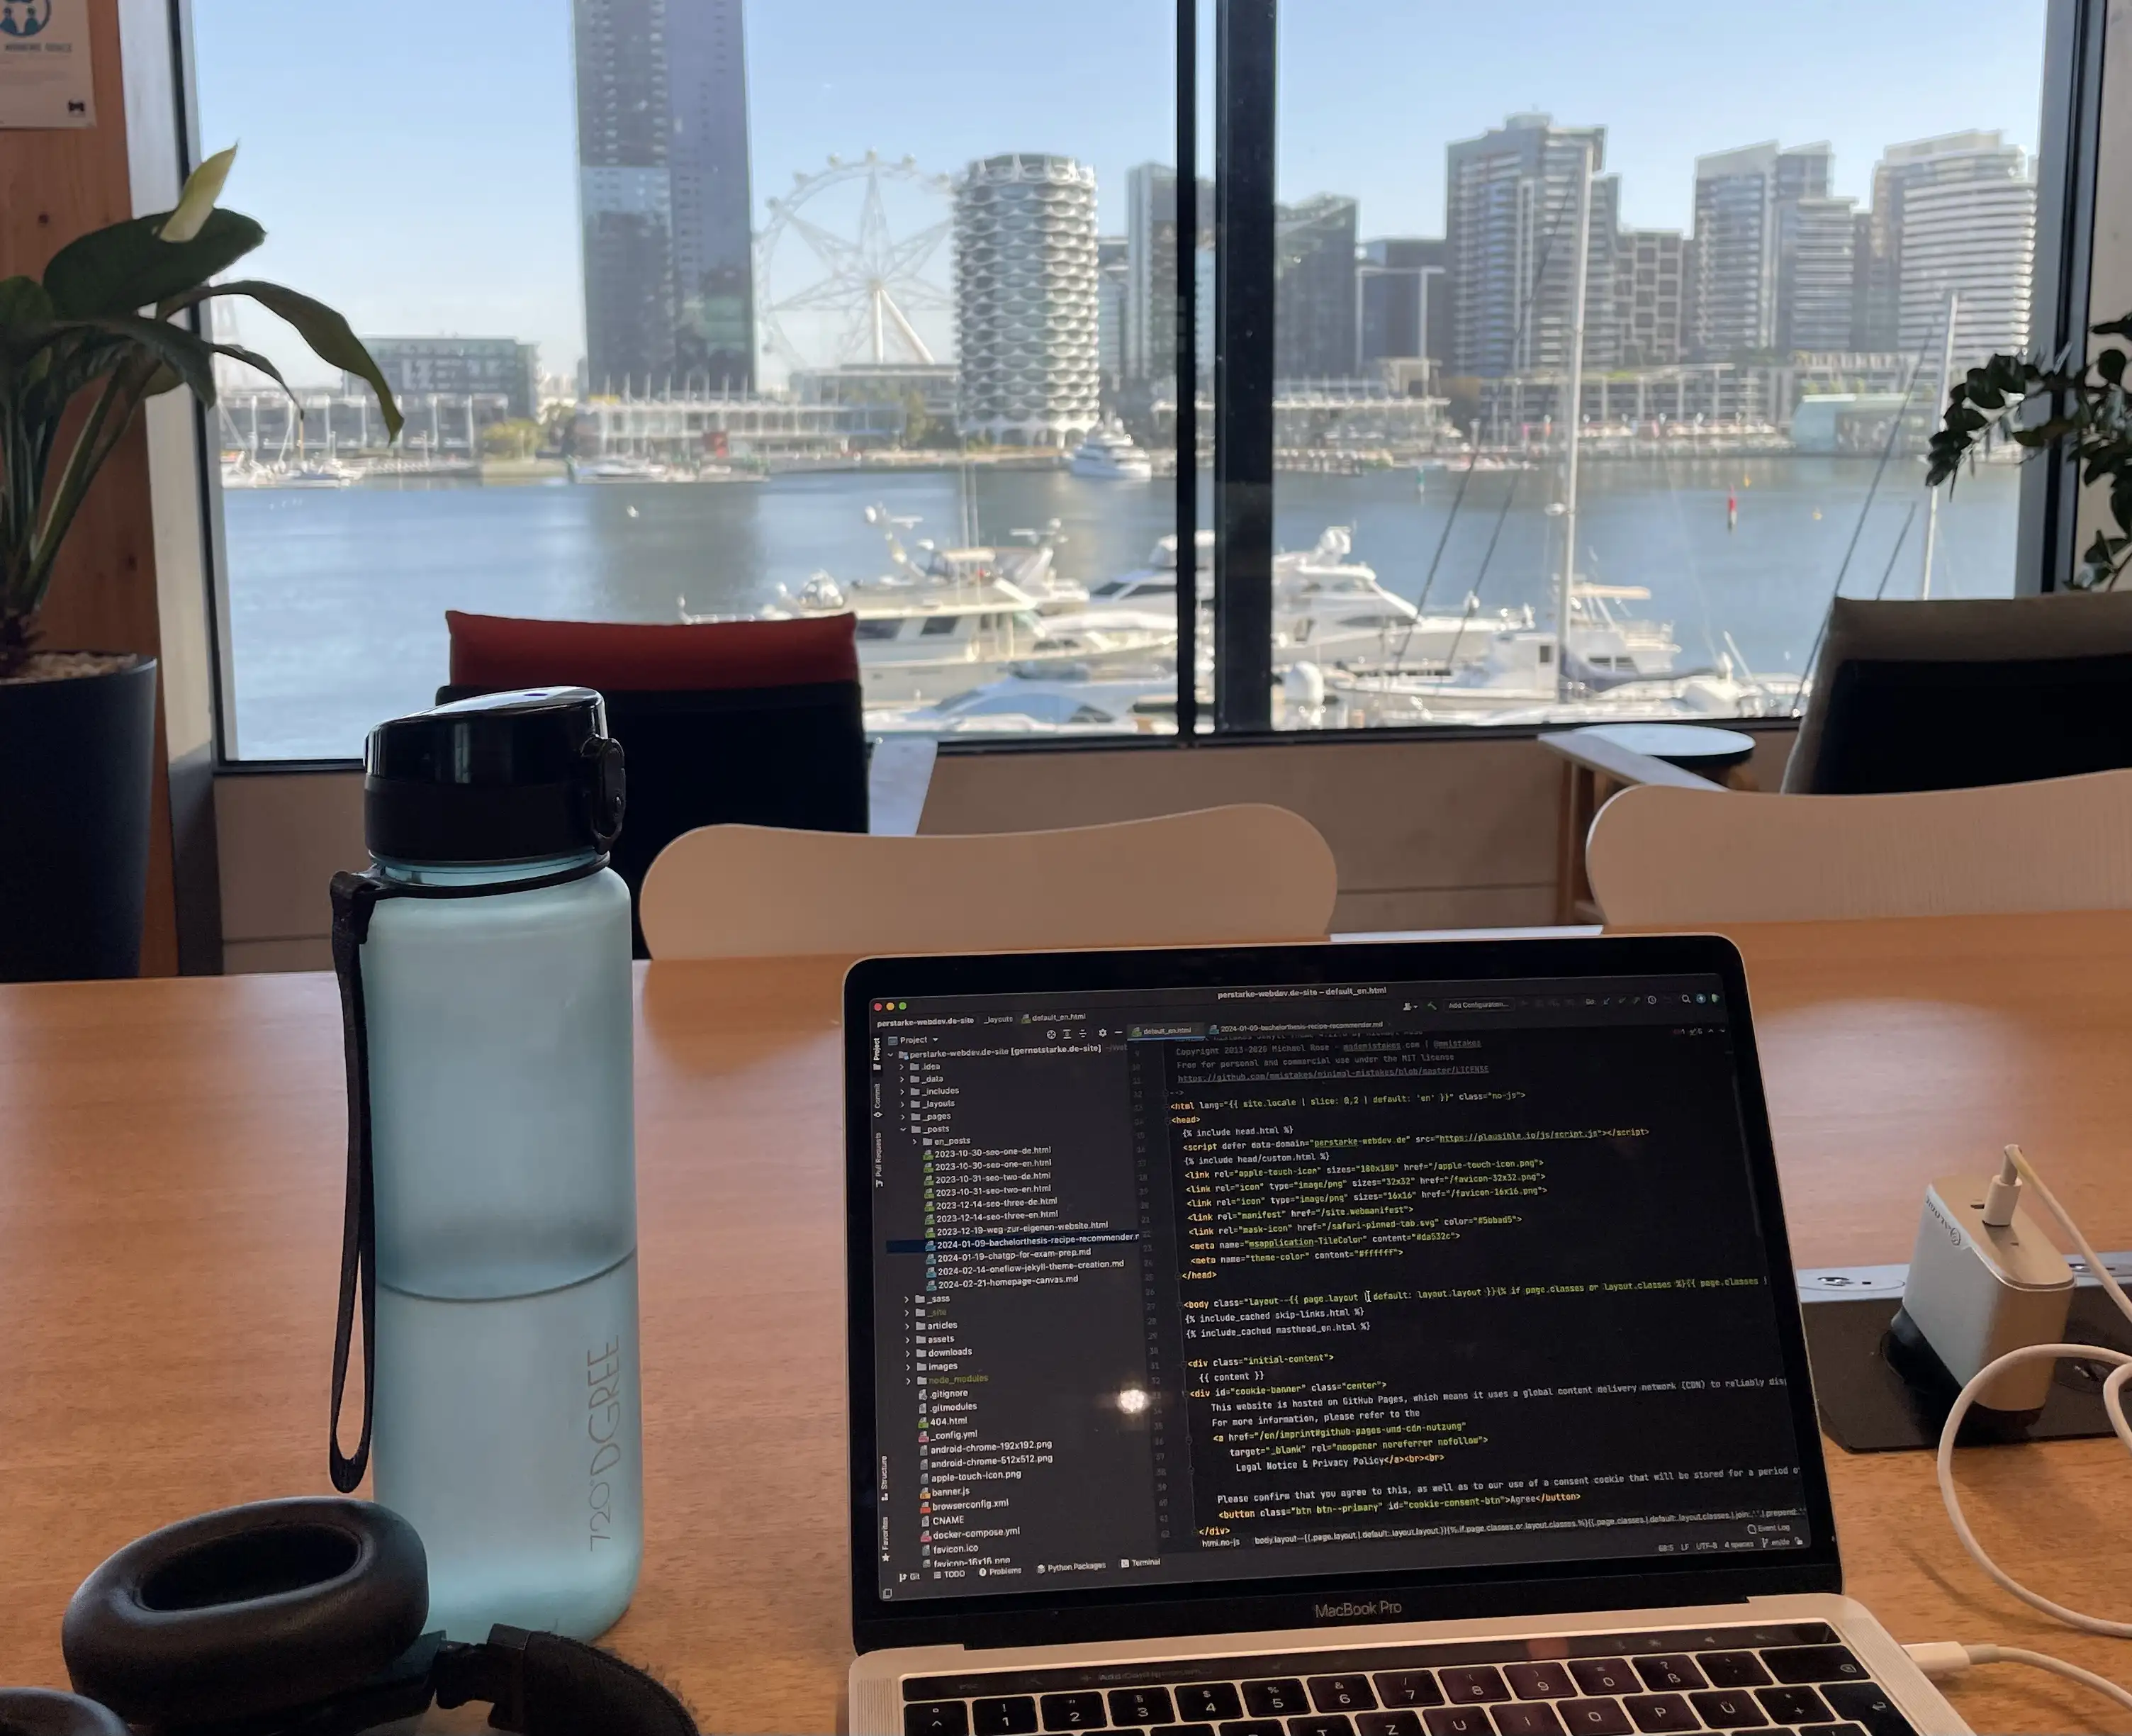 Working with a view, from Library at the Dock, Melbourne City, Australia